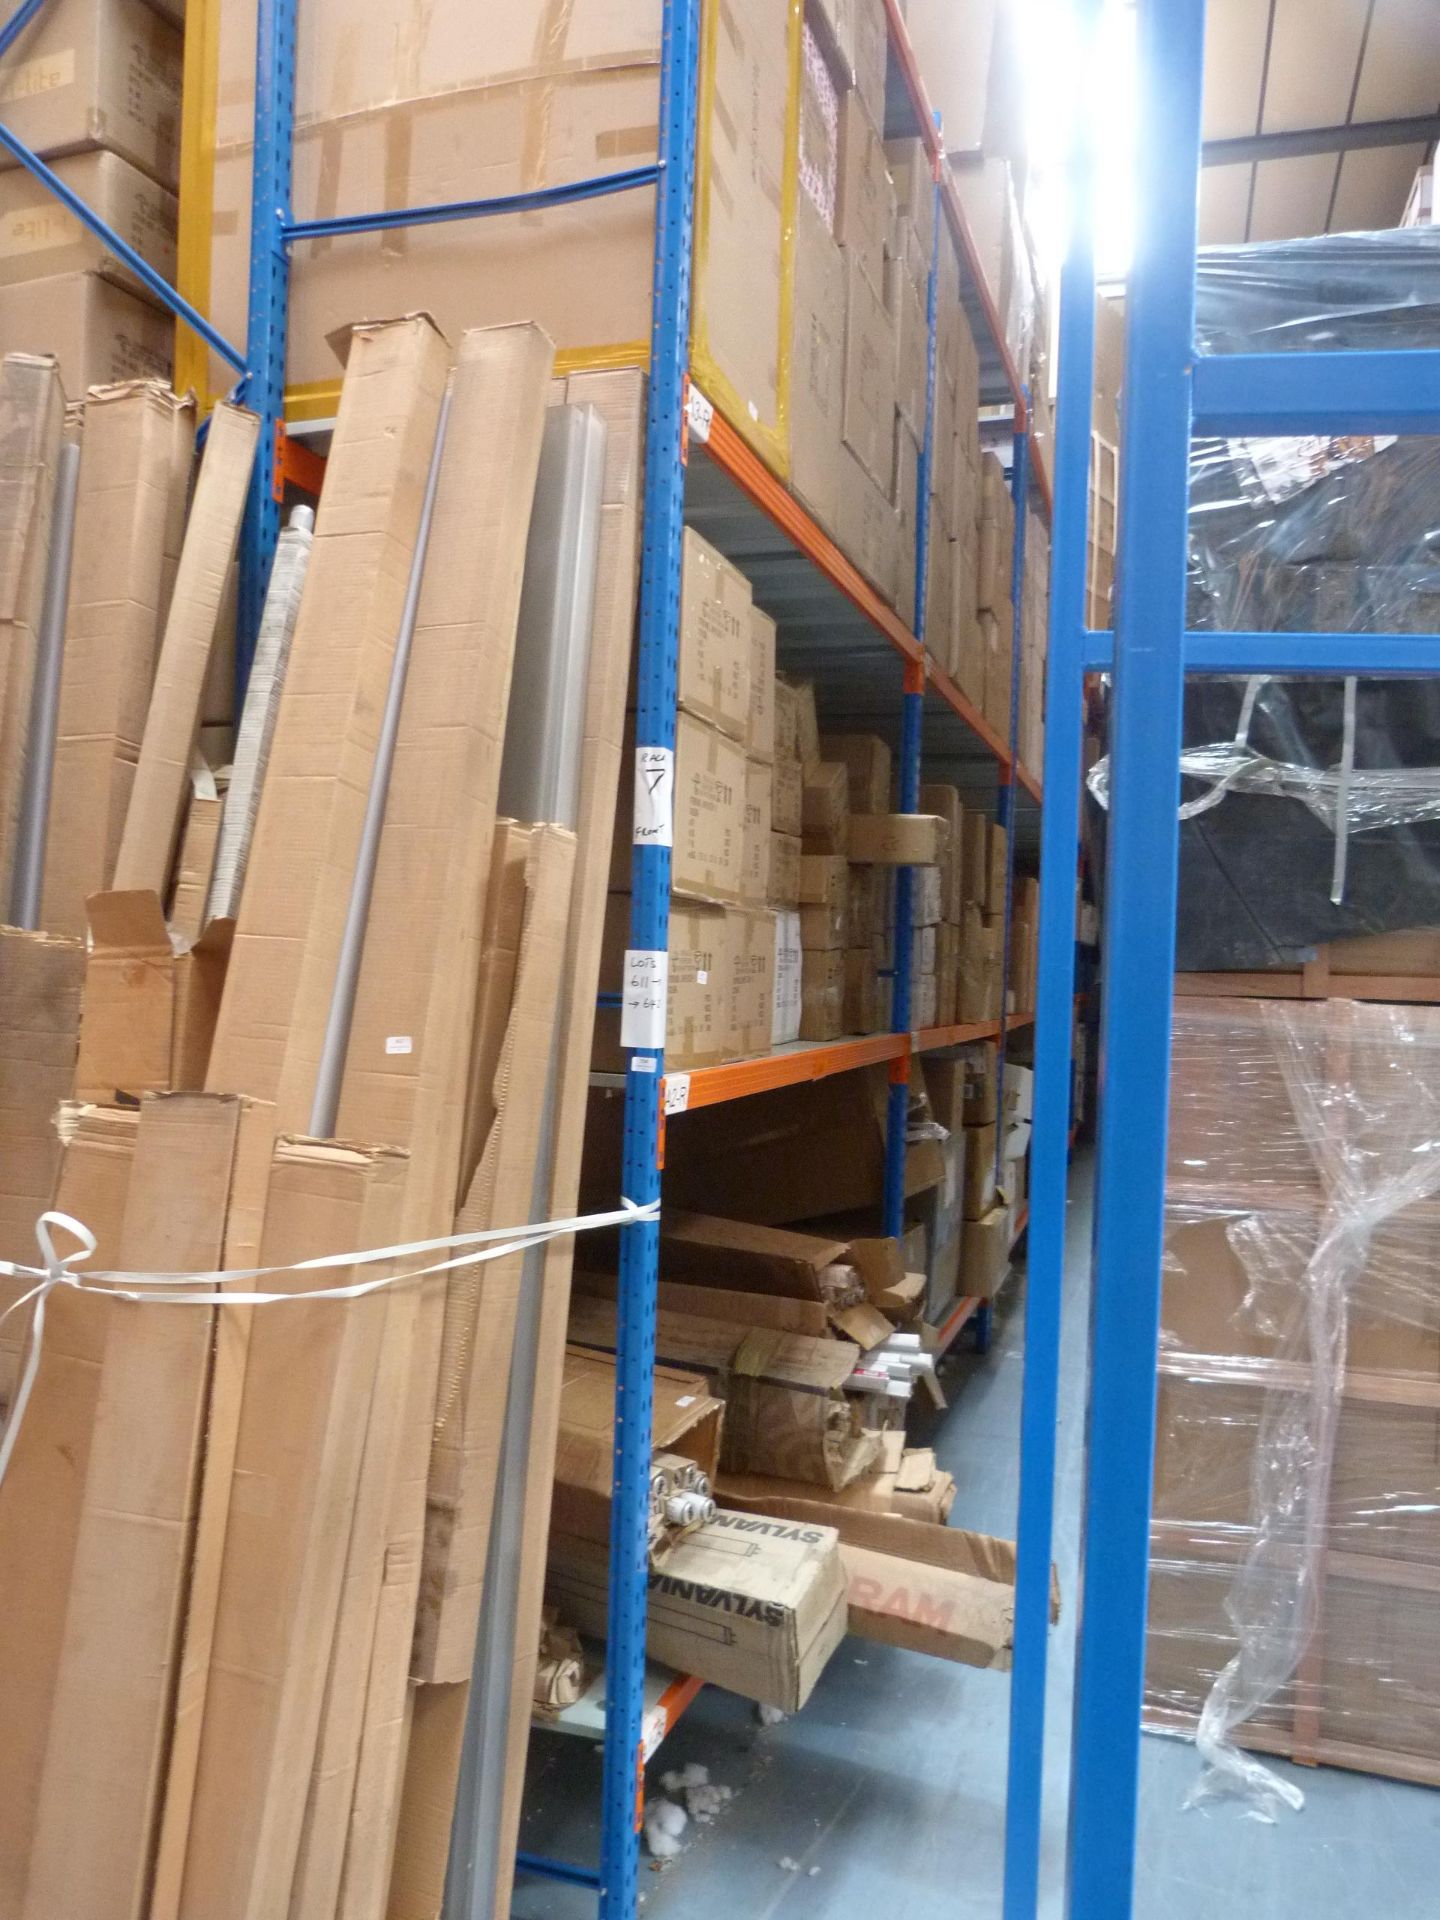 *Six Bays of Pallet Racking; 7x Stanchions, 72x Cross Beams, 1.8m wide, 1.6m deep